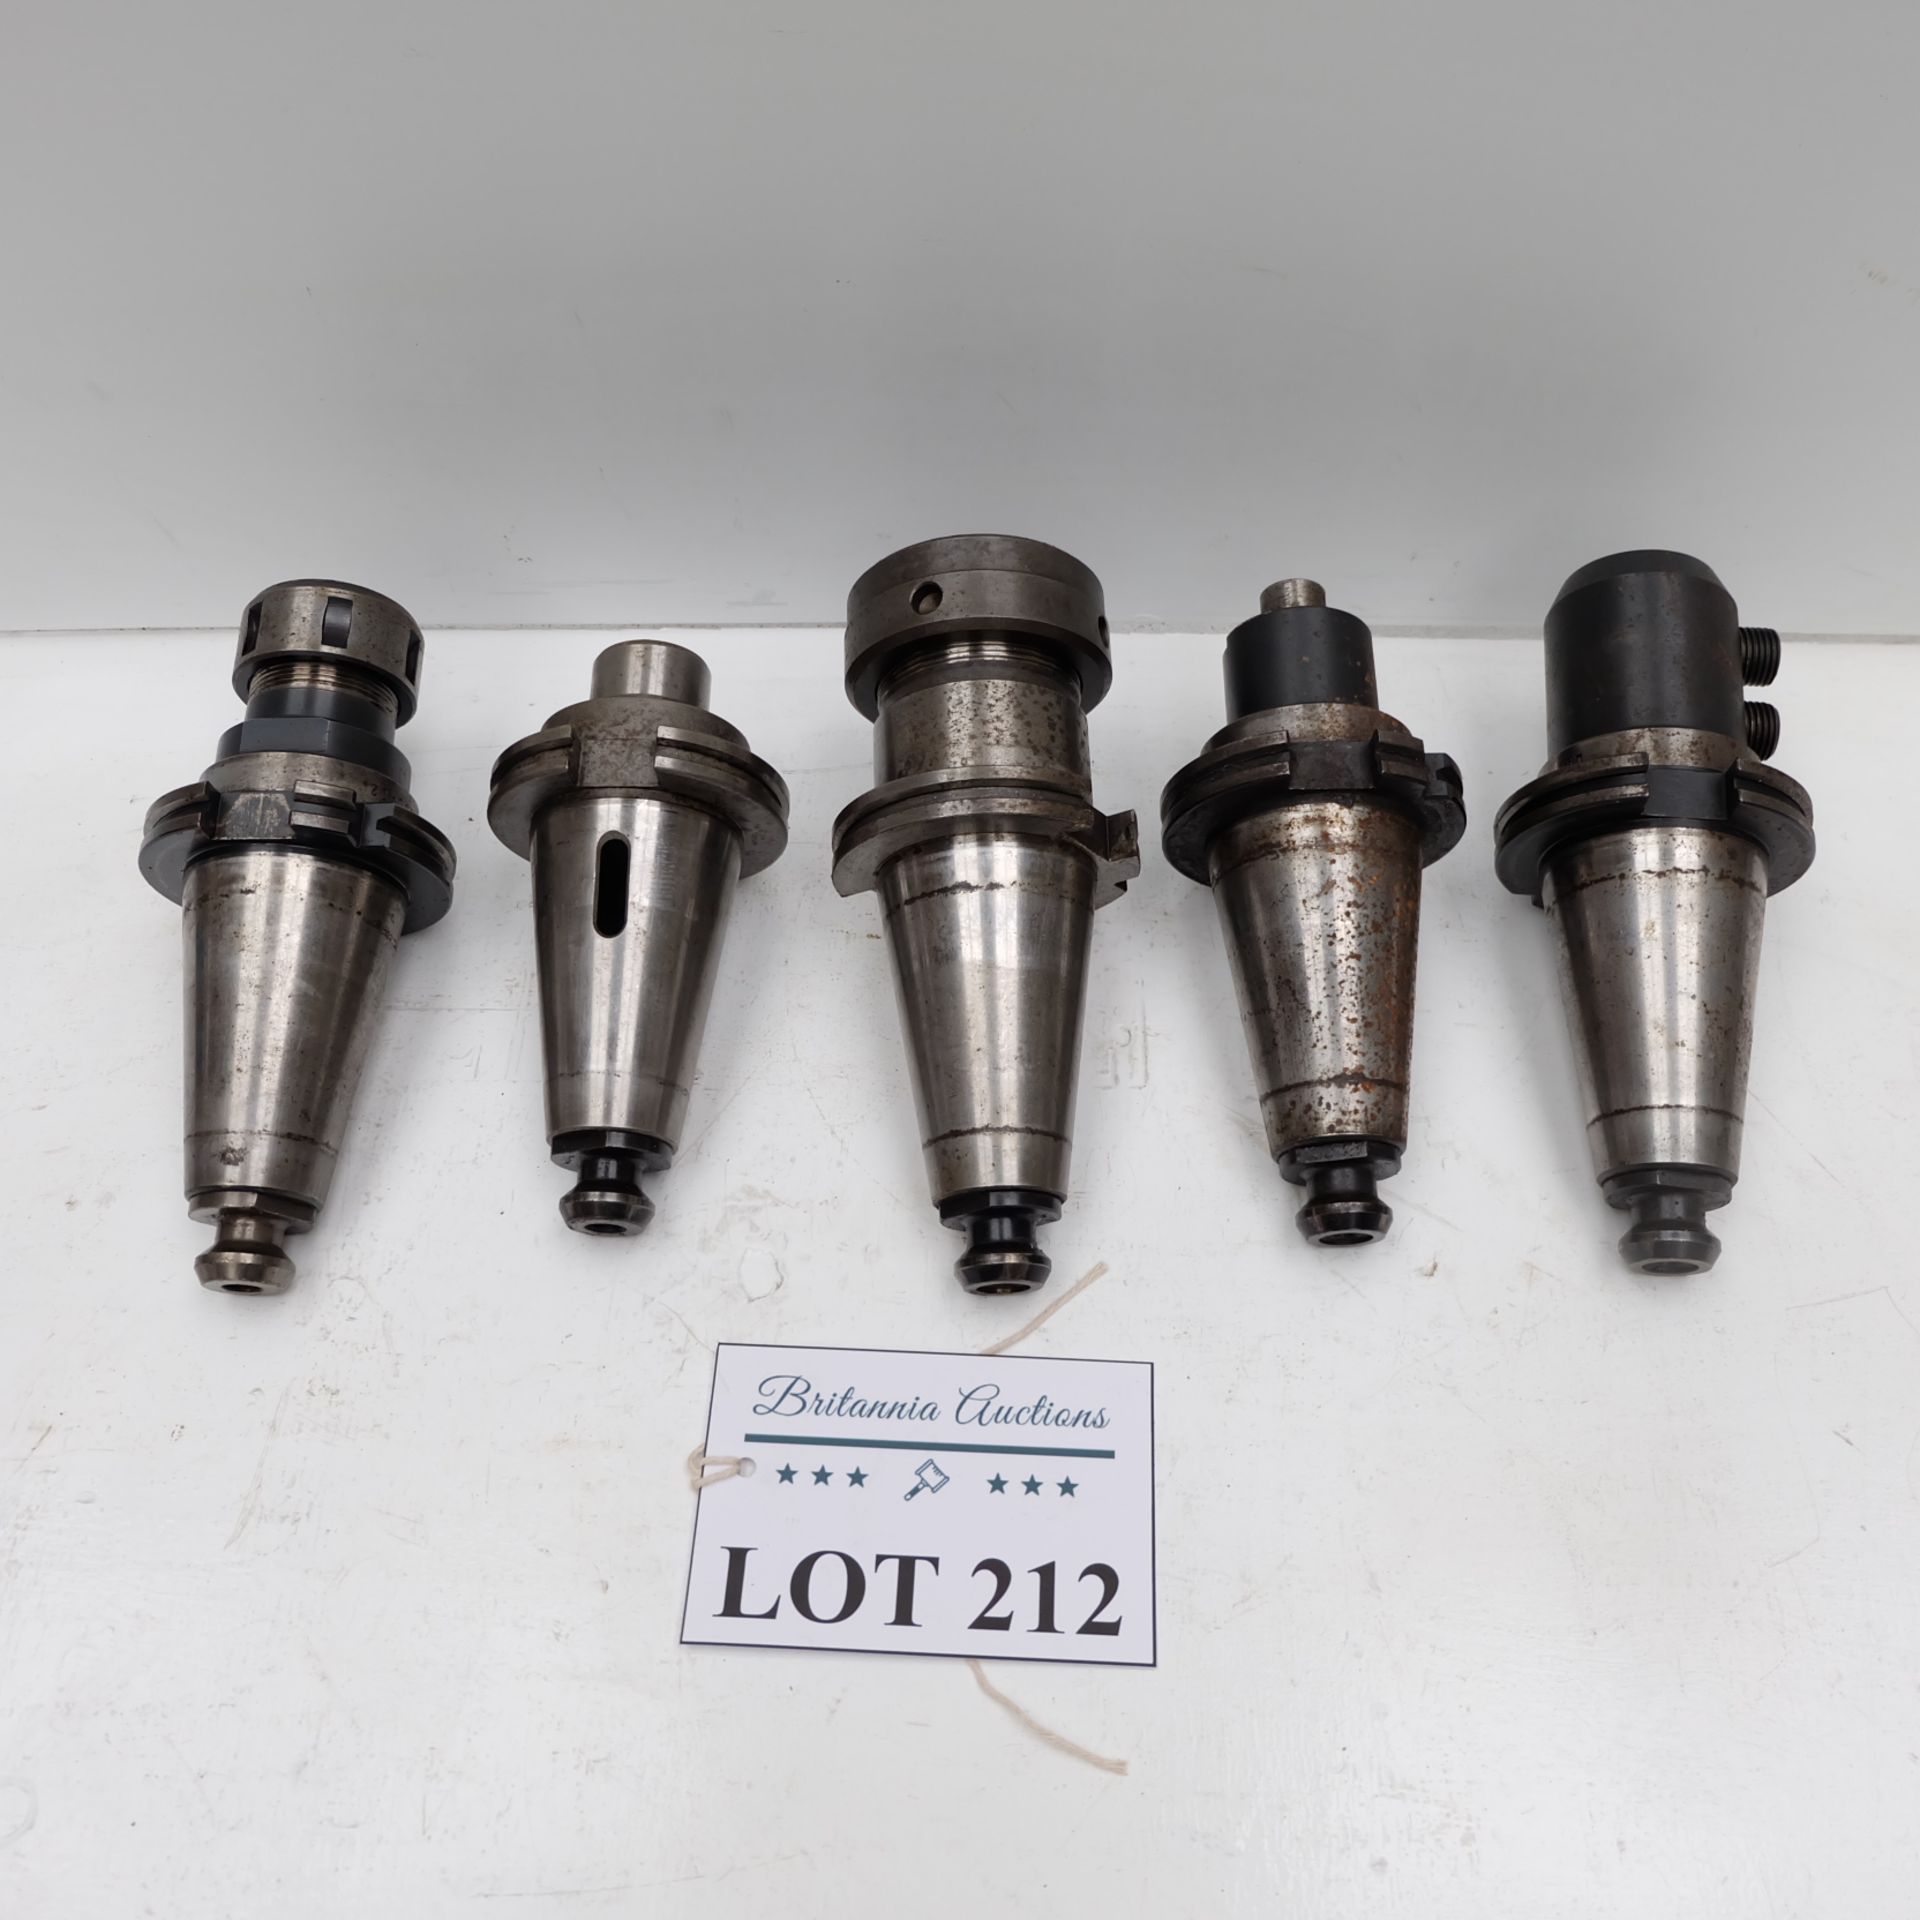 Quantity of 5 x SK 50 Spindle Tooling.